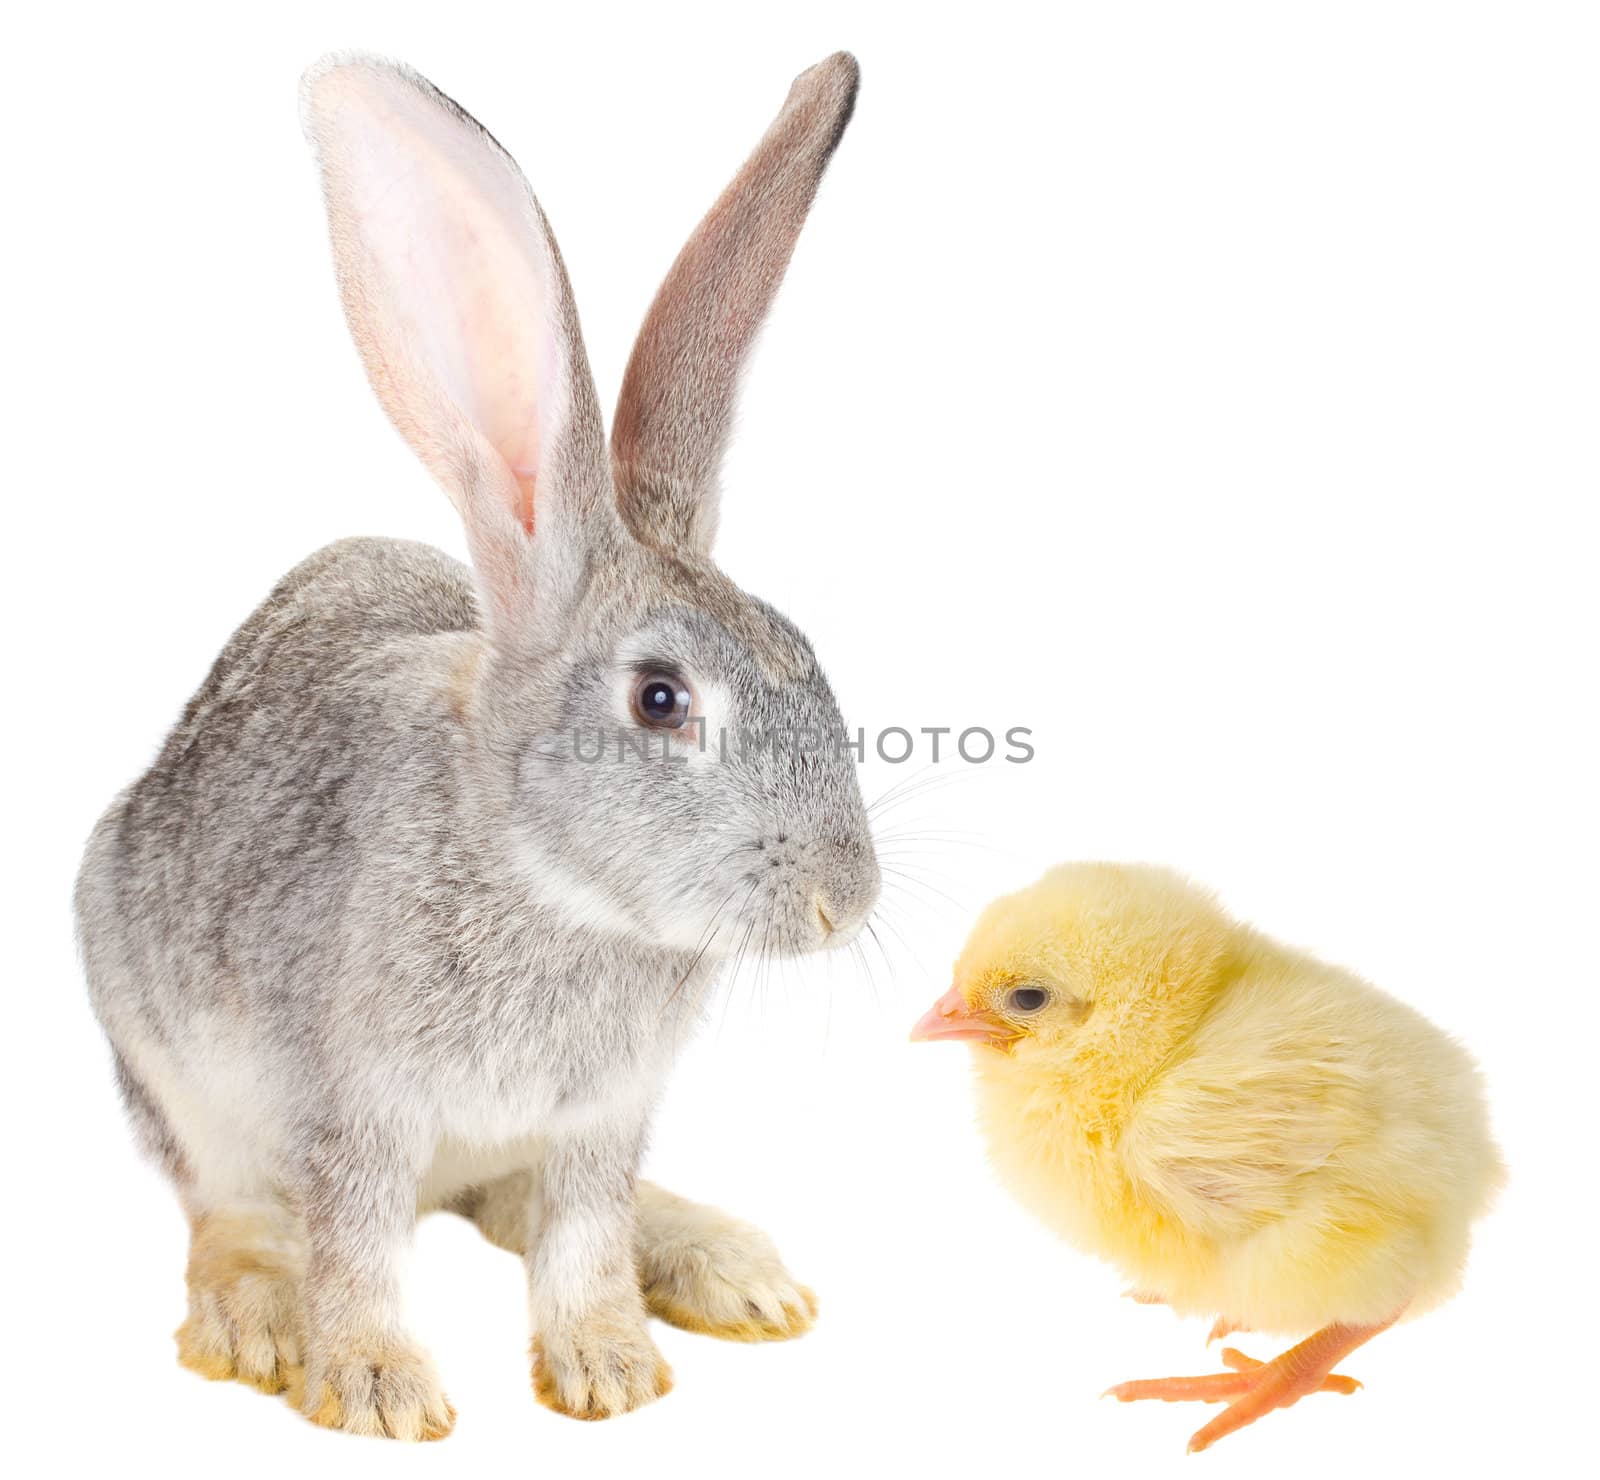 close-up rabbit and chick, isolated on white